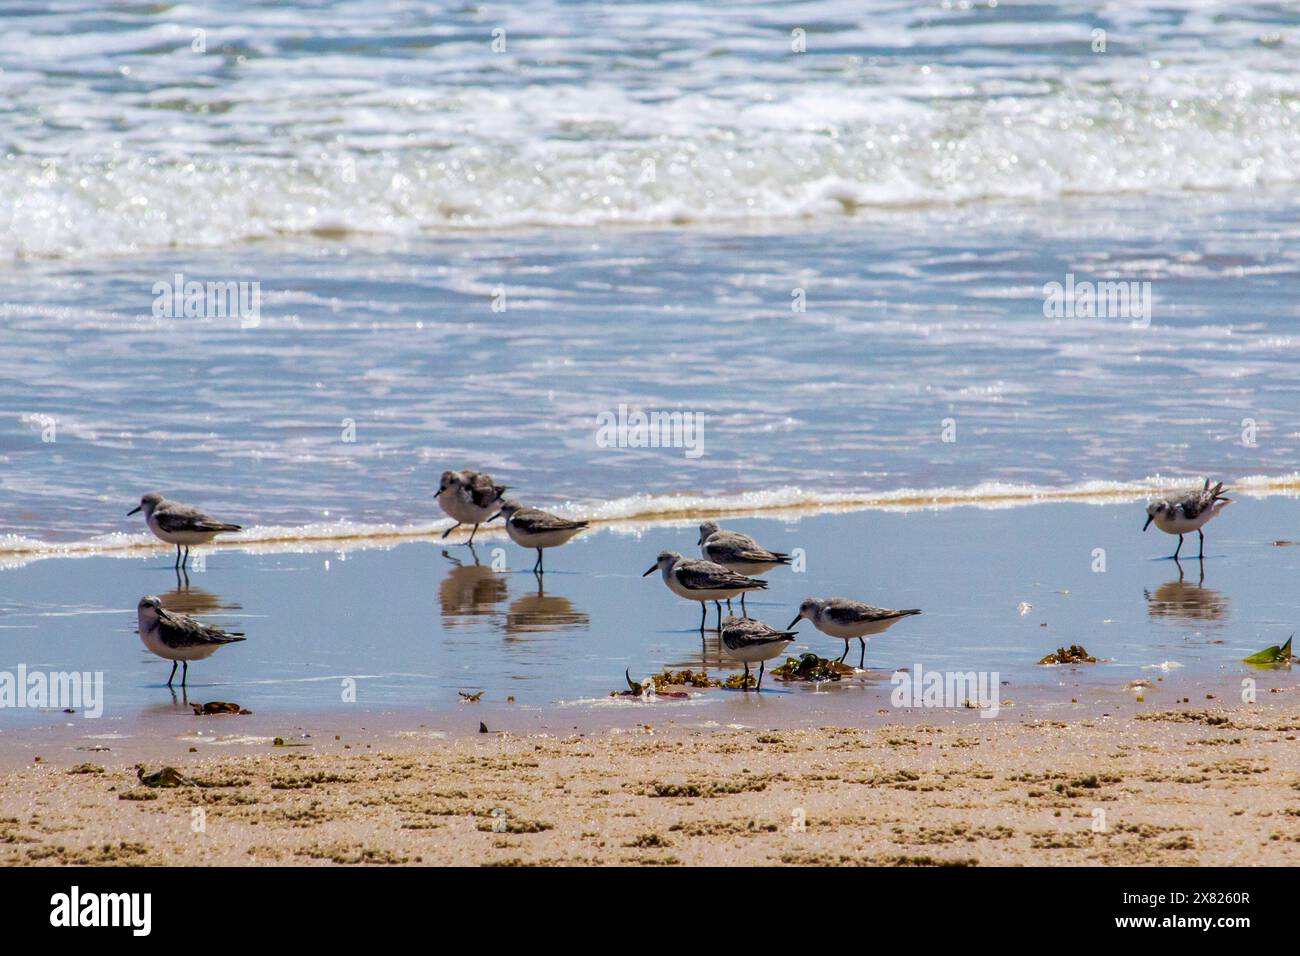 A large flock of sanderlings (Calidris alba) foraging on the wet sand in on a sandy beach in Mozambique Stock Photo